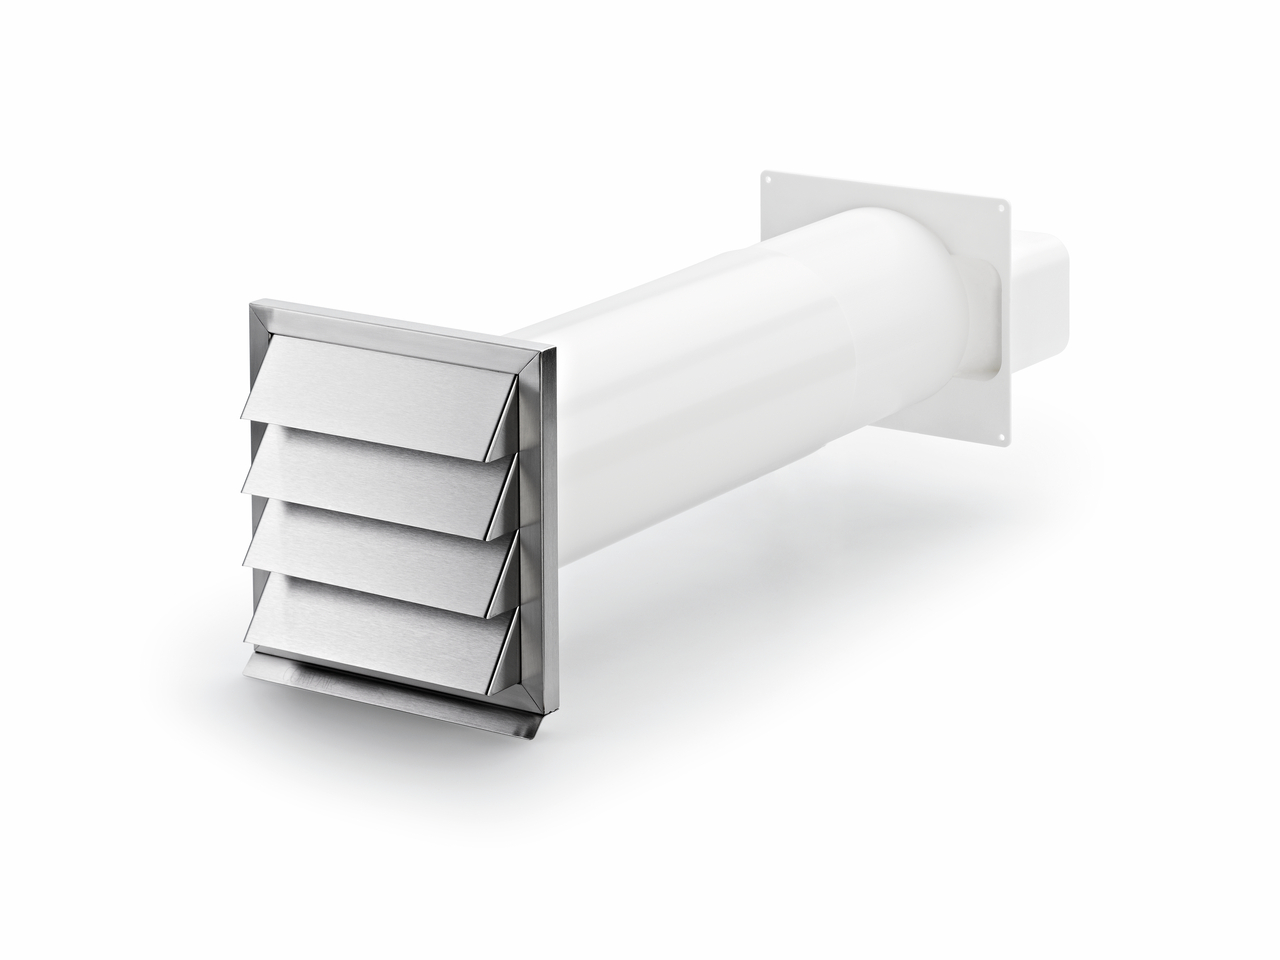  Klima-E flow 125 wall conduct, white, stainless steel